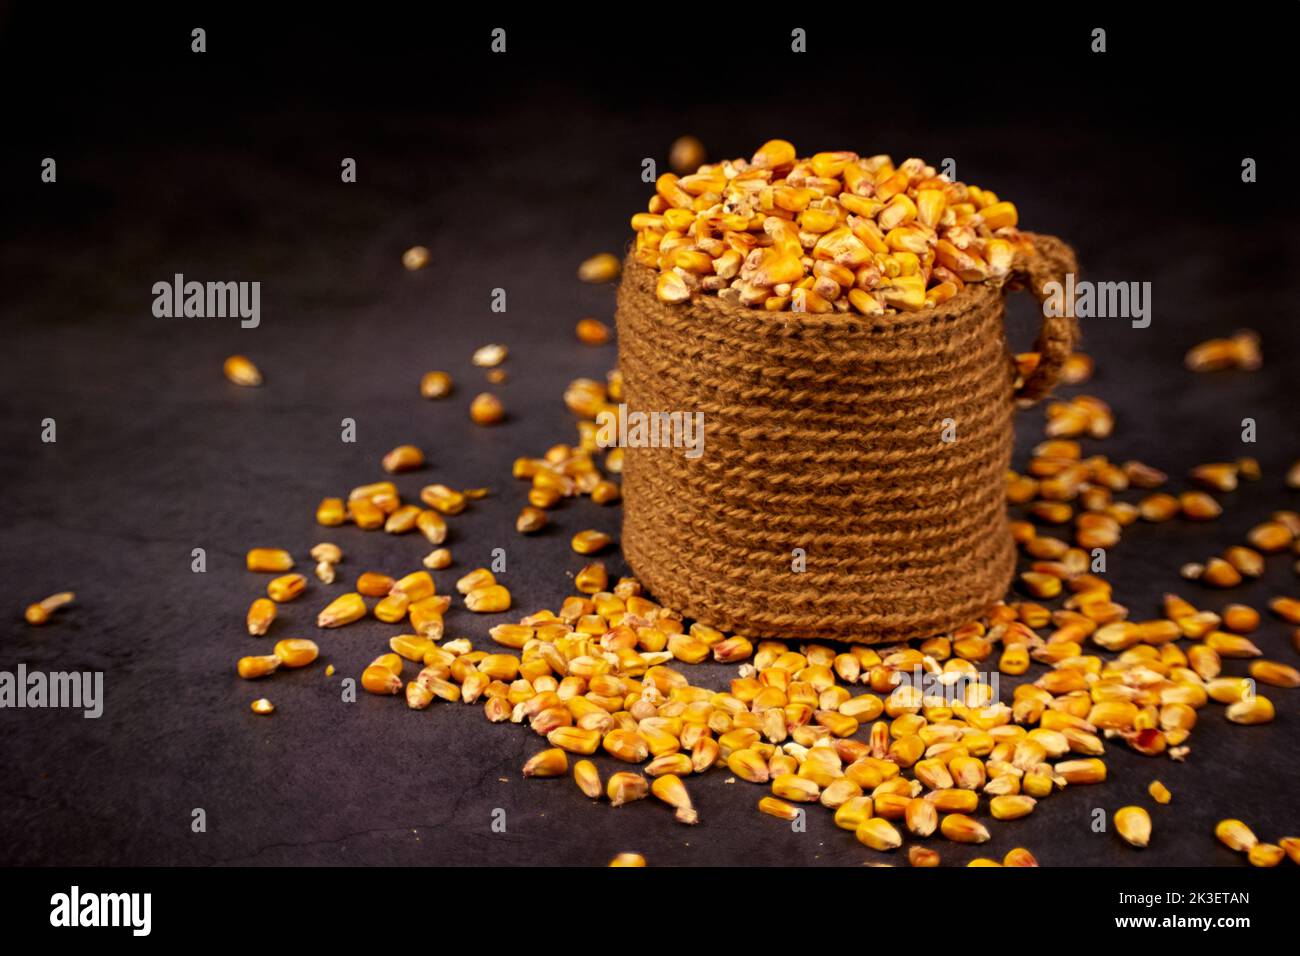 Grains of corn in jute sack and scattered grains around on a dark background Stock Photo